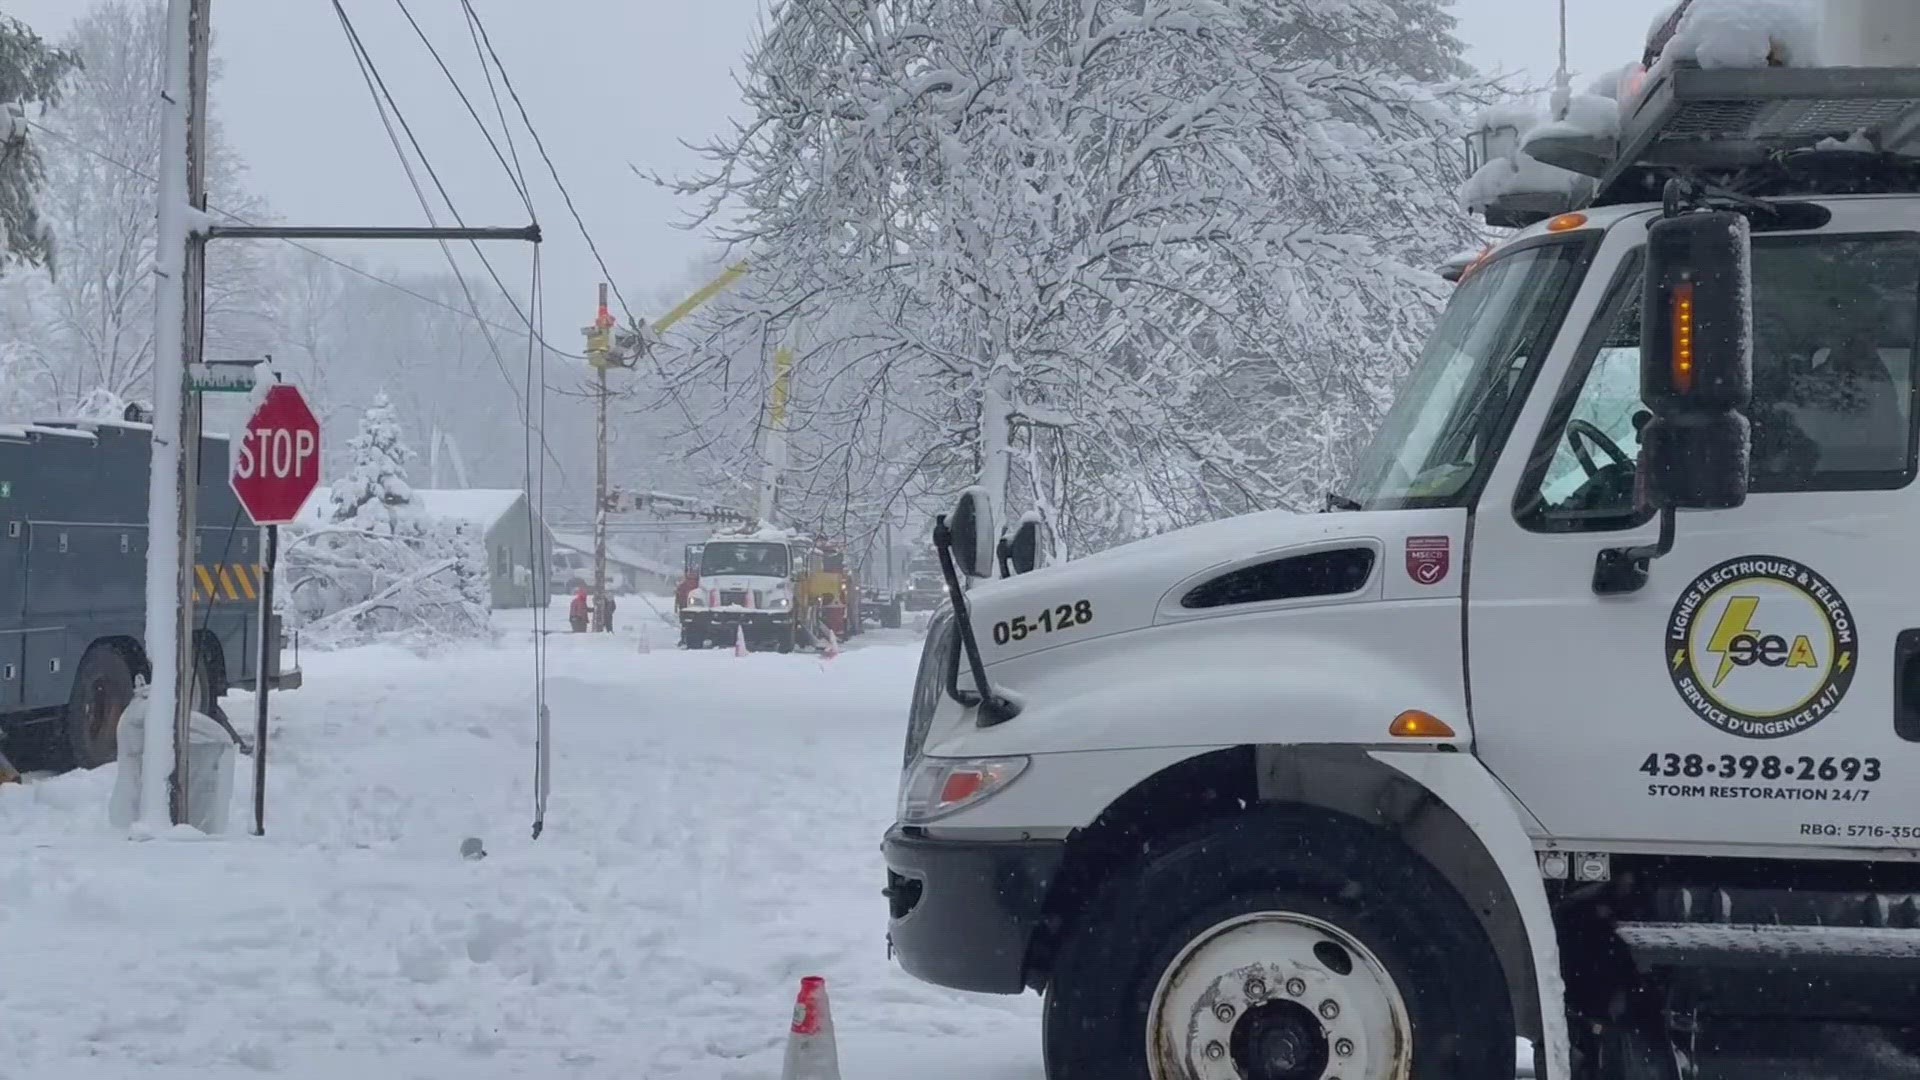 All available plow workers were out in force to clear streets in Lewiston and make them more accessible for travelers and CMP crews working to get power restored.